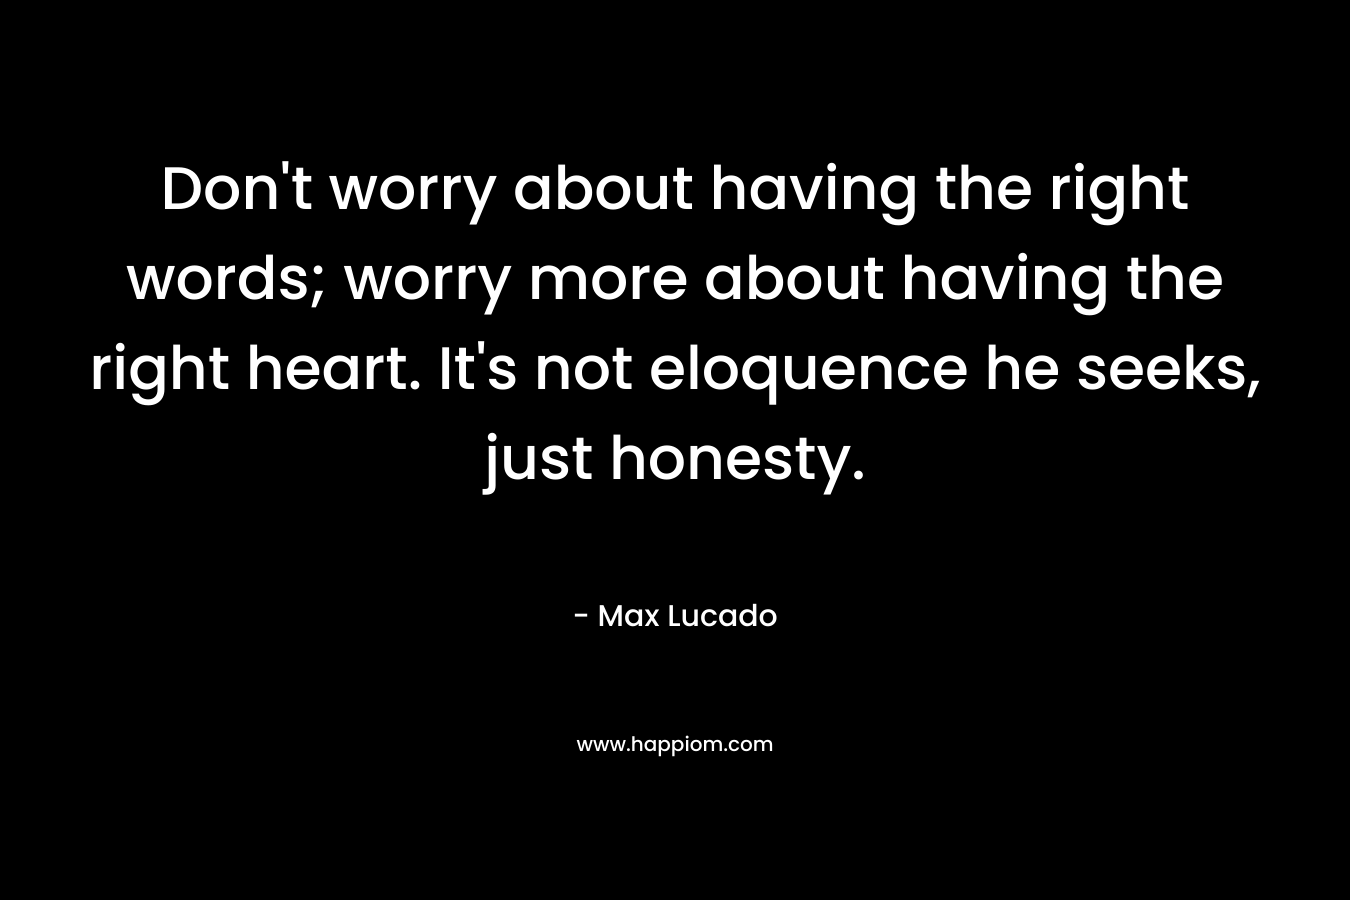 Don't worry about having the right words; worry more about having the right heart. It's not eloquence he seeks, just honesty.